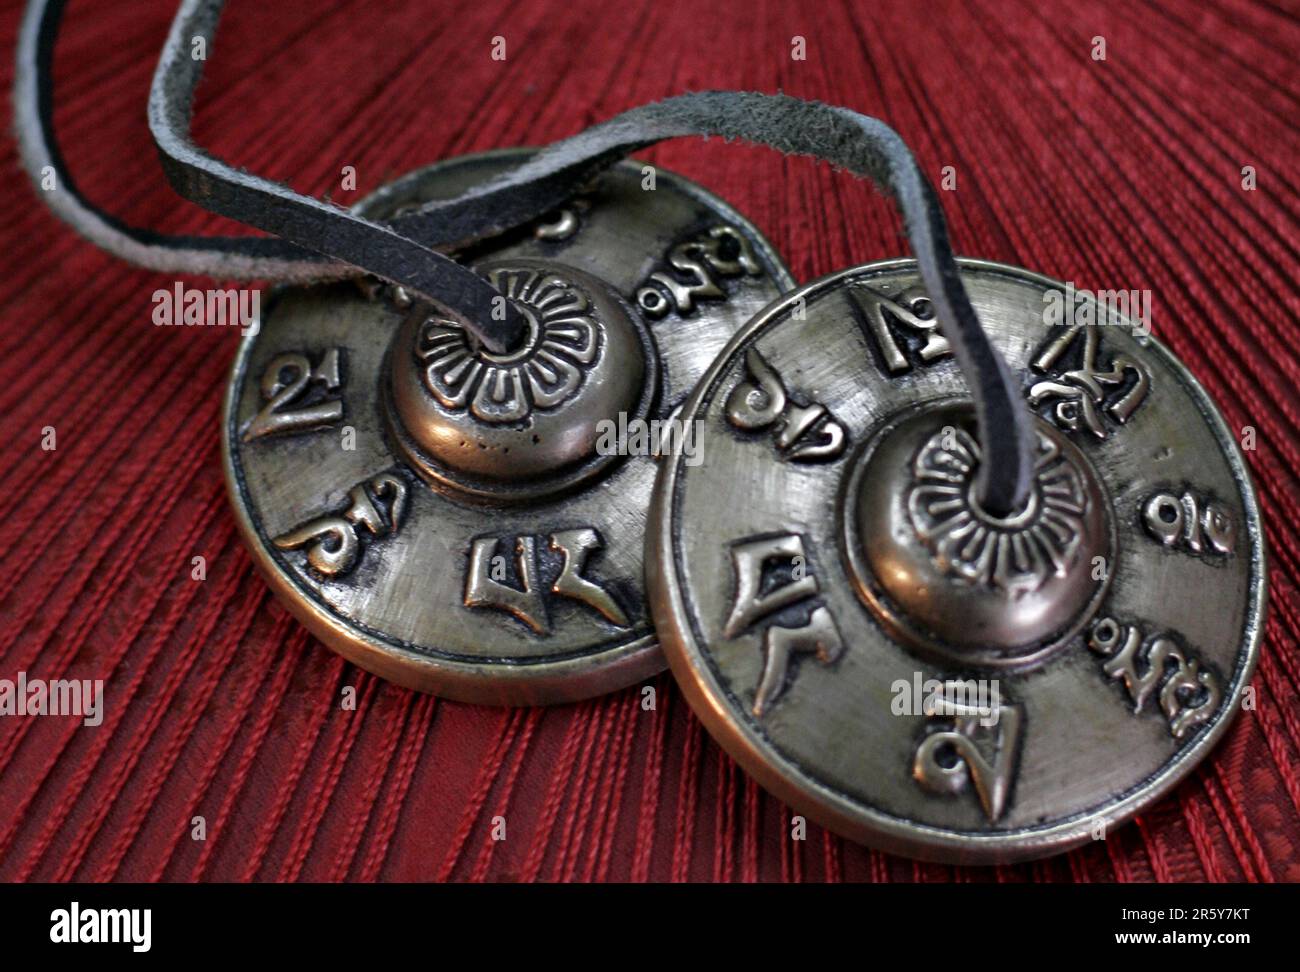 Tingshas are small cymbals used in prayer and rituals by Tibetan Buddhist practitioners. Stock Photo